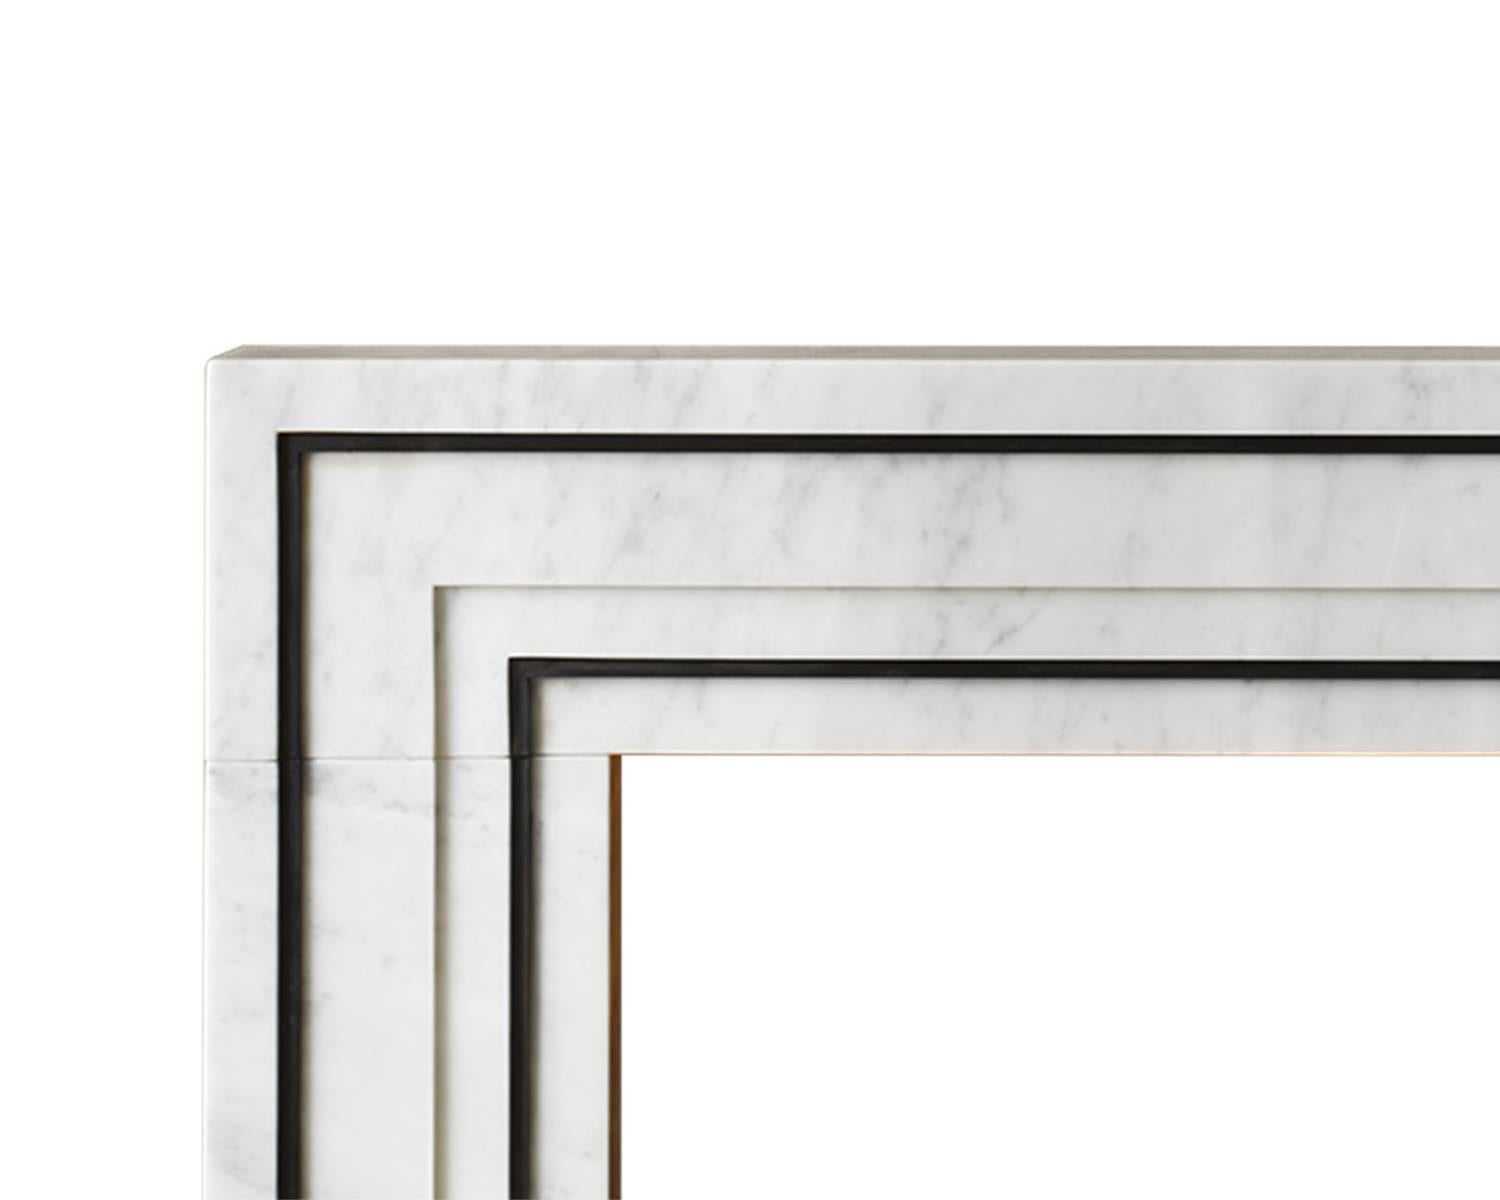 Designed by Eric Cohler for his contemporary collection for Chesney’s, the Ealing, was inspired by the Industrial revolution of the 19th century. 

This mantel is carved in Carrara marble with blackened steel accents.

Opening dimensions: 39